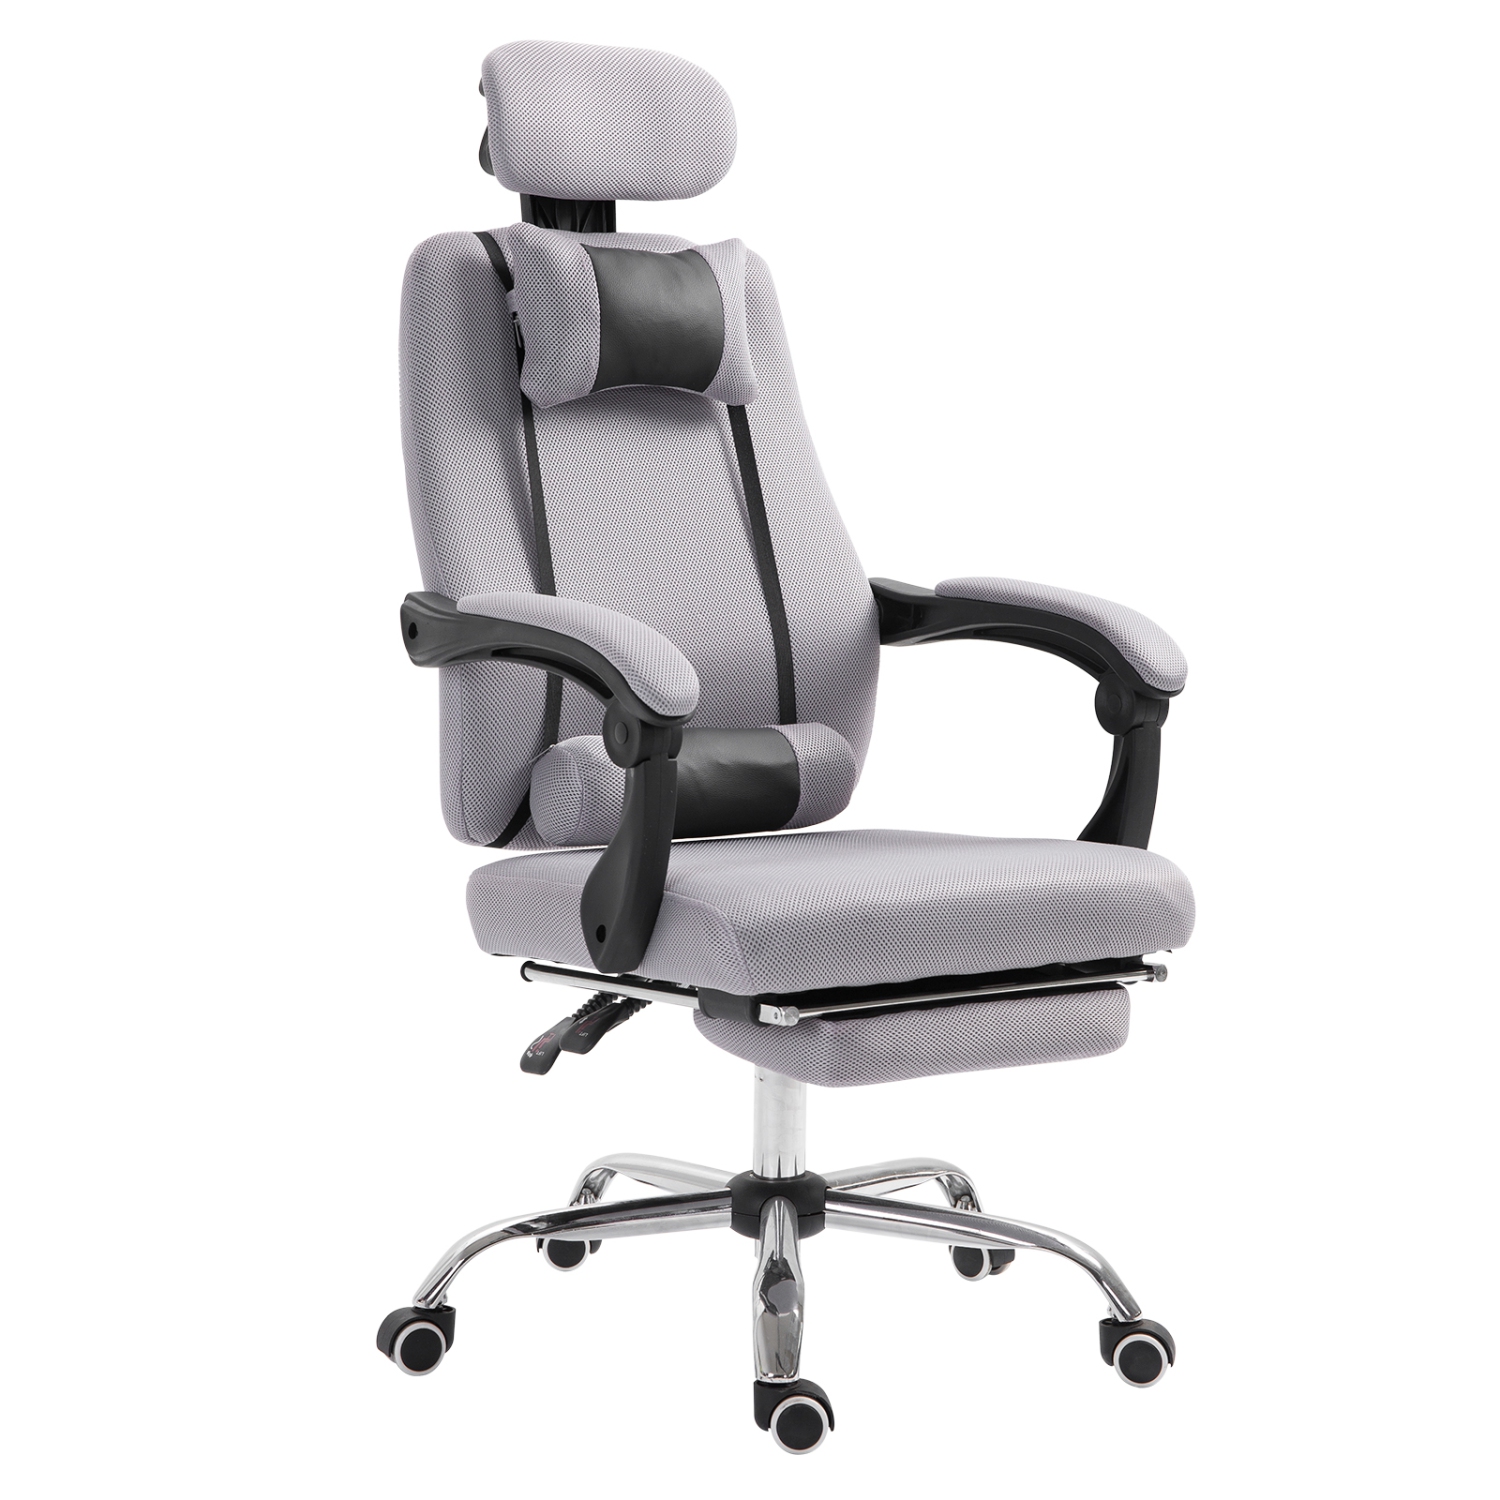 Vinsetto Office Chair Ergonomic Executive Mesh Chair Gaming Seat Lumbar Support w/ Footrest Headrest Grey